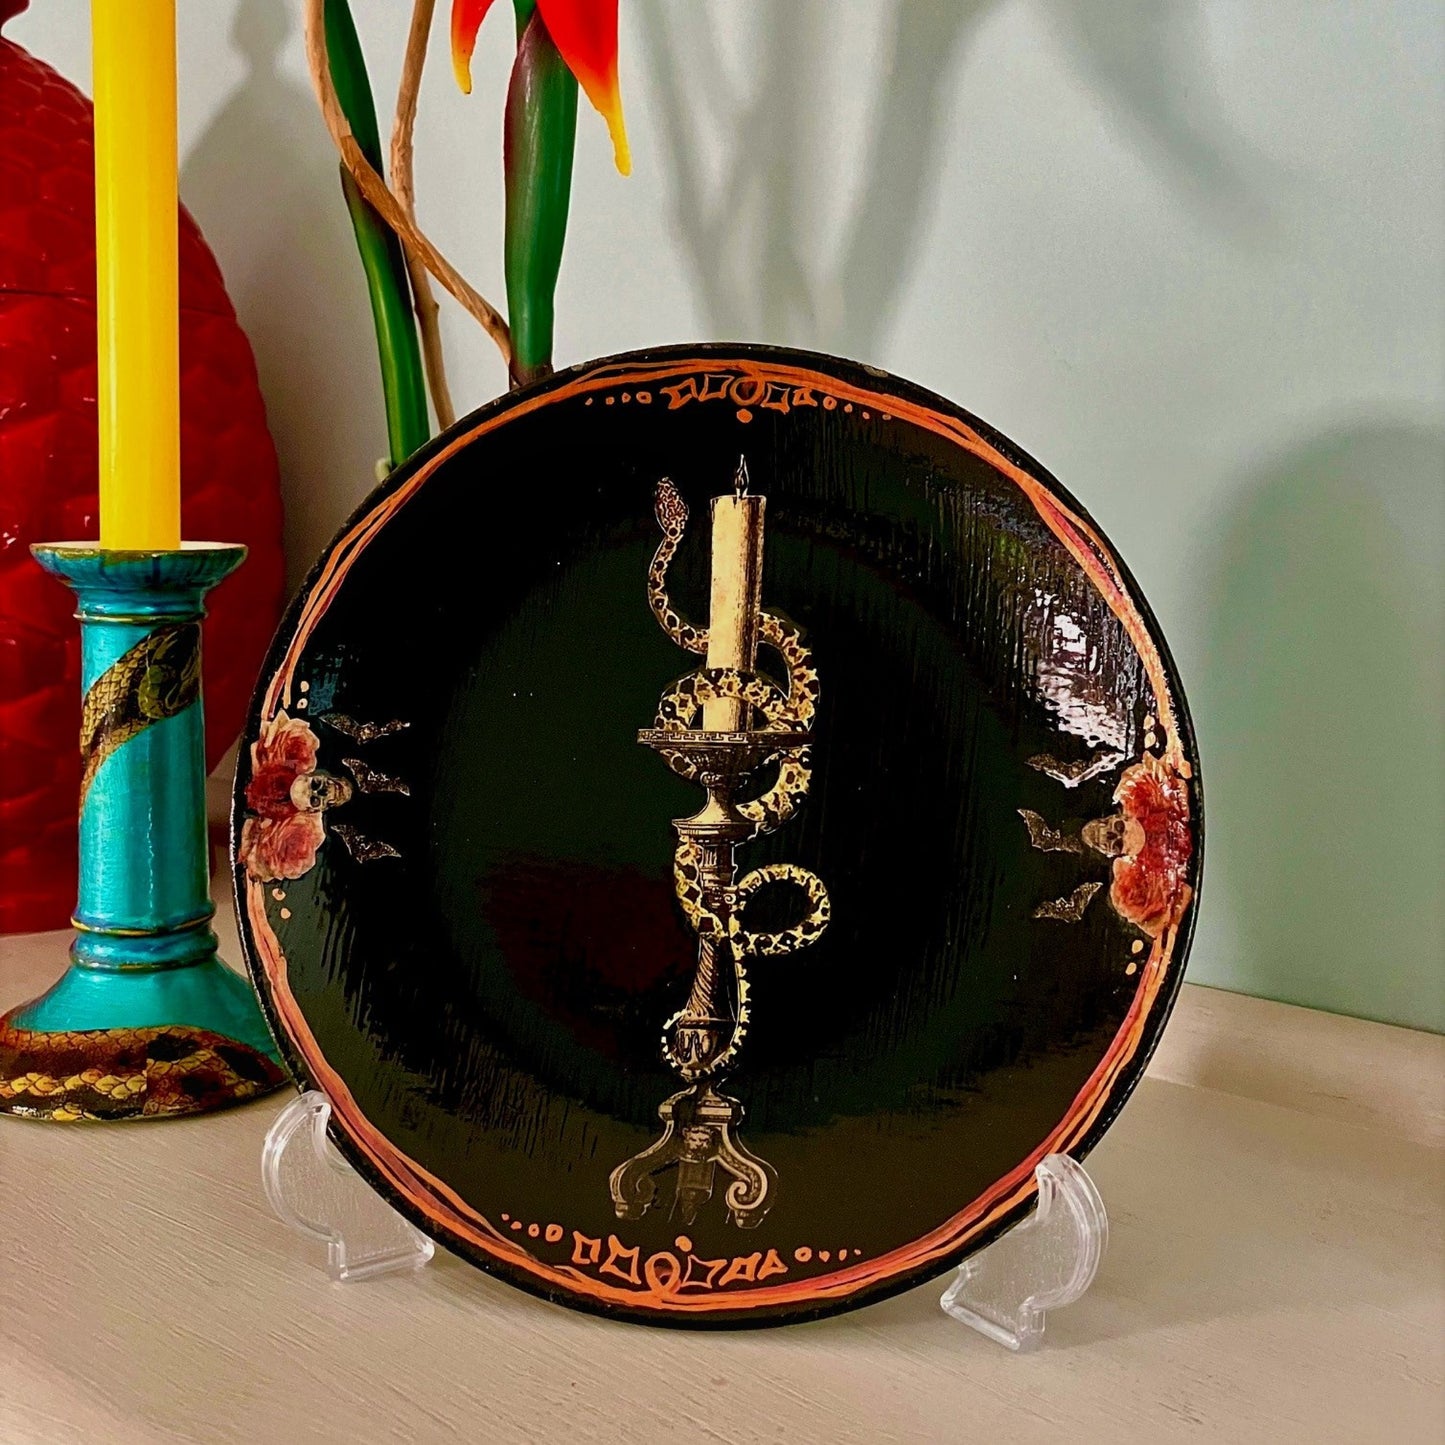 House of Frisson "Snake On Candlestick" Black Wall Plate front. Collage artwork featuring a snake wrapped around a candlestick, with skulls and bats details, on a black background. Plate on a plate stand, resting on a table.